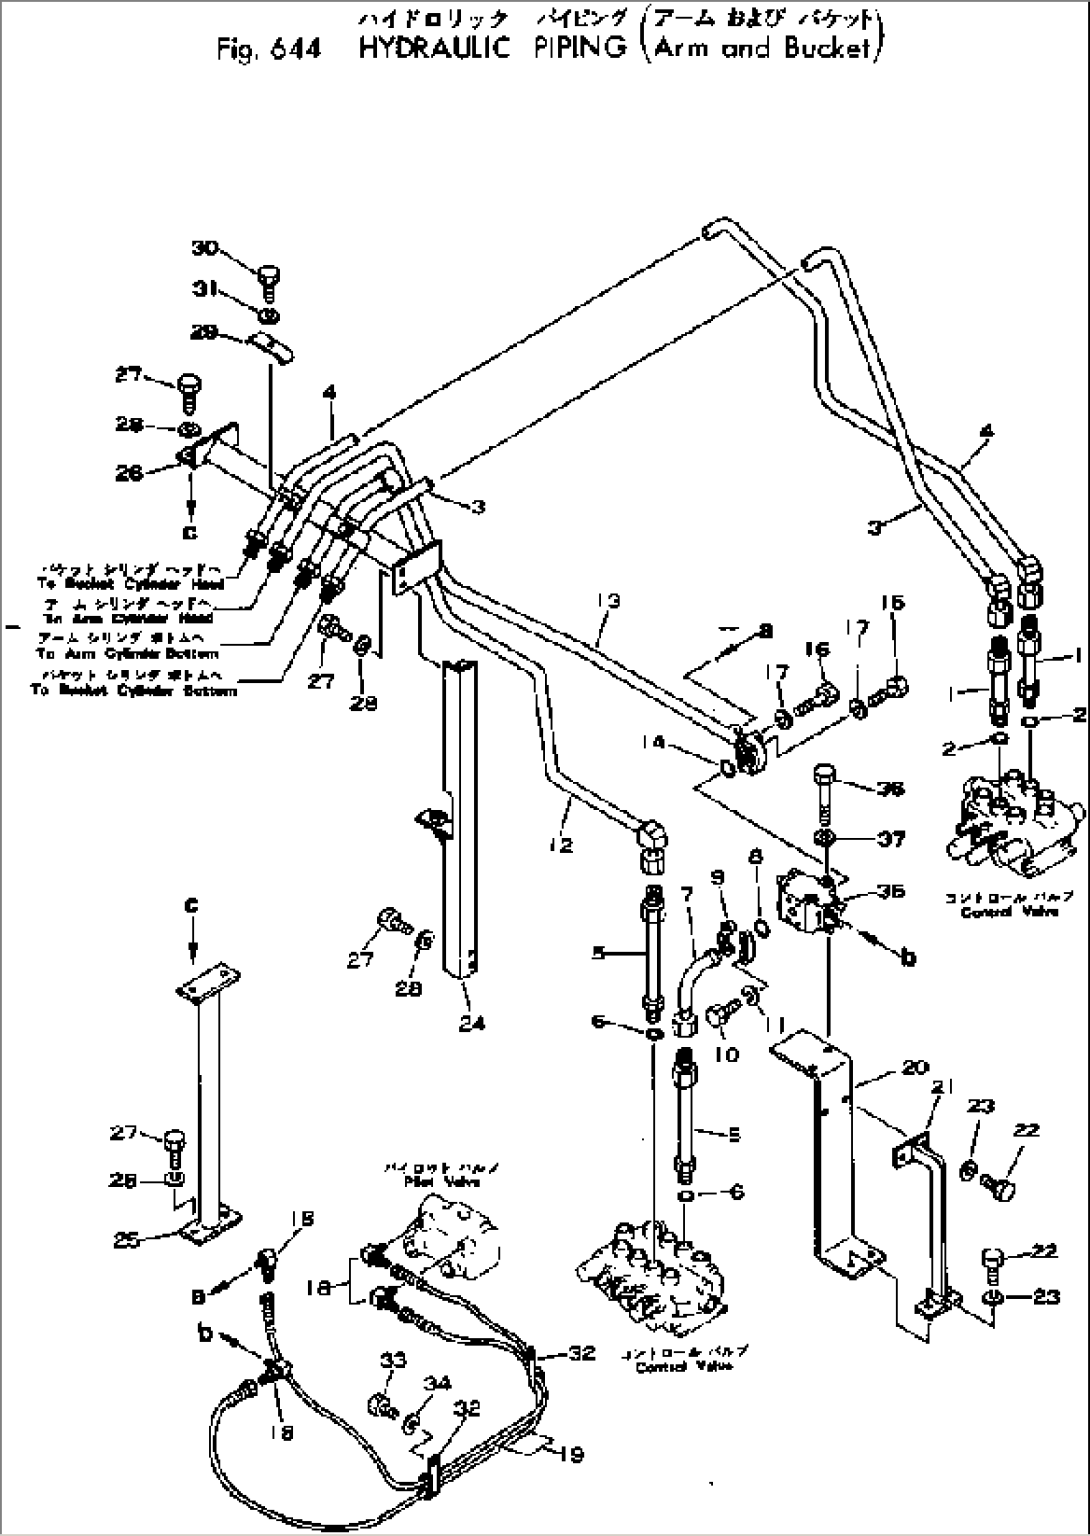 HYDRAULIC PIPING (ARM AND BUCKET)